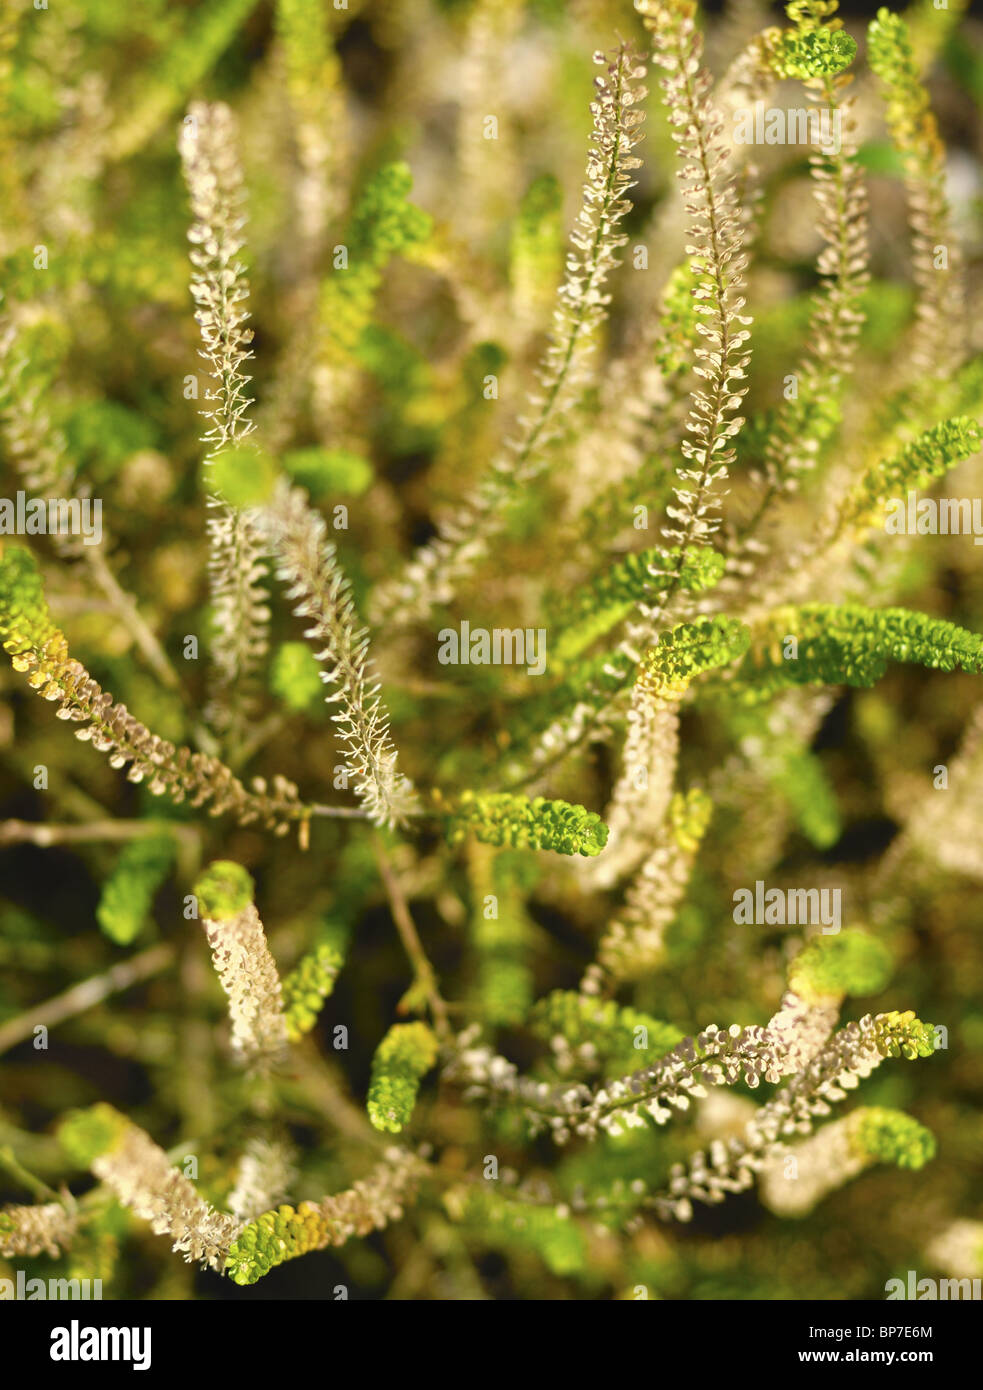 Roadside Pepperweed closeup background. Extremely shallow DOF Stock Photo